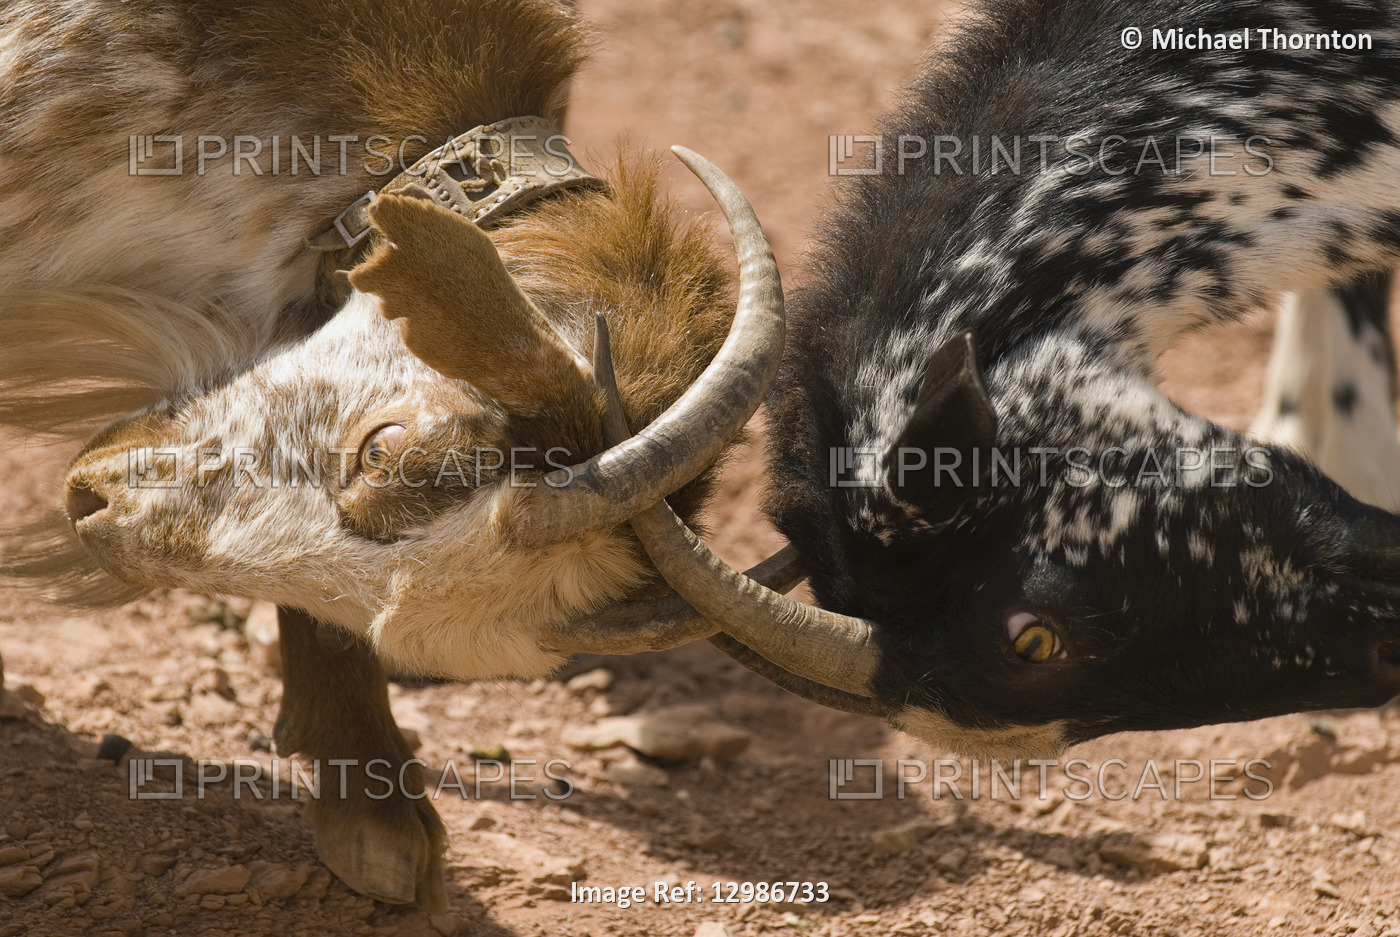 Goats fighting in Andalucia, Spain.